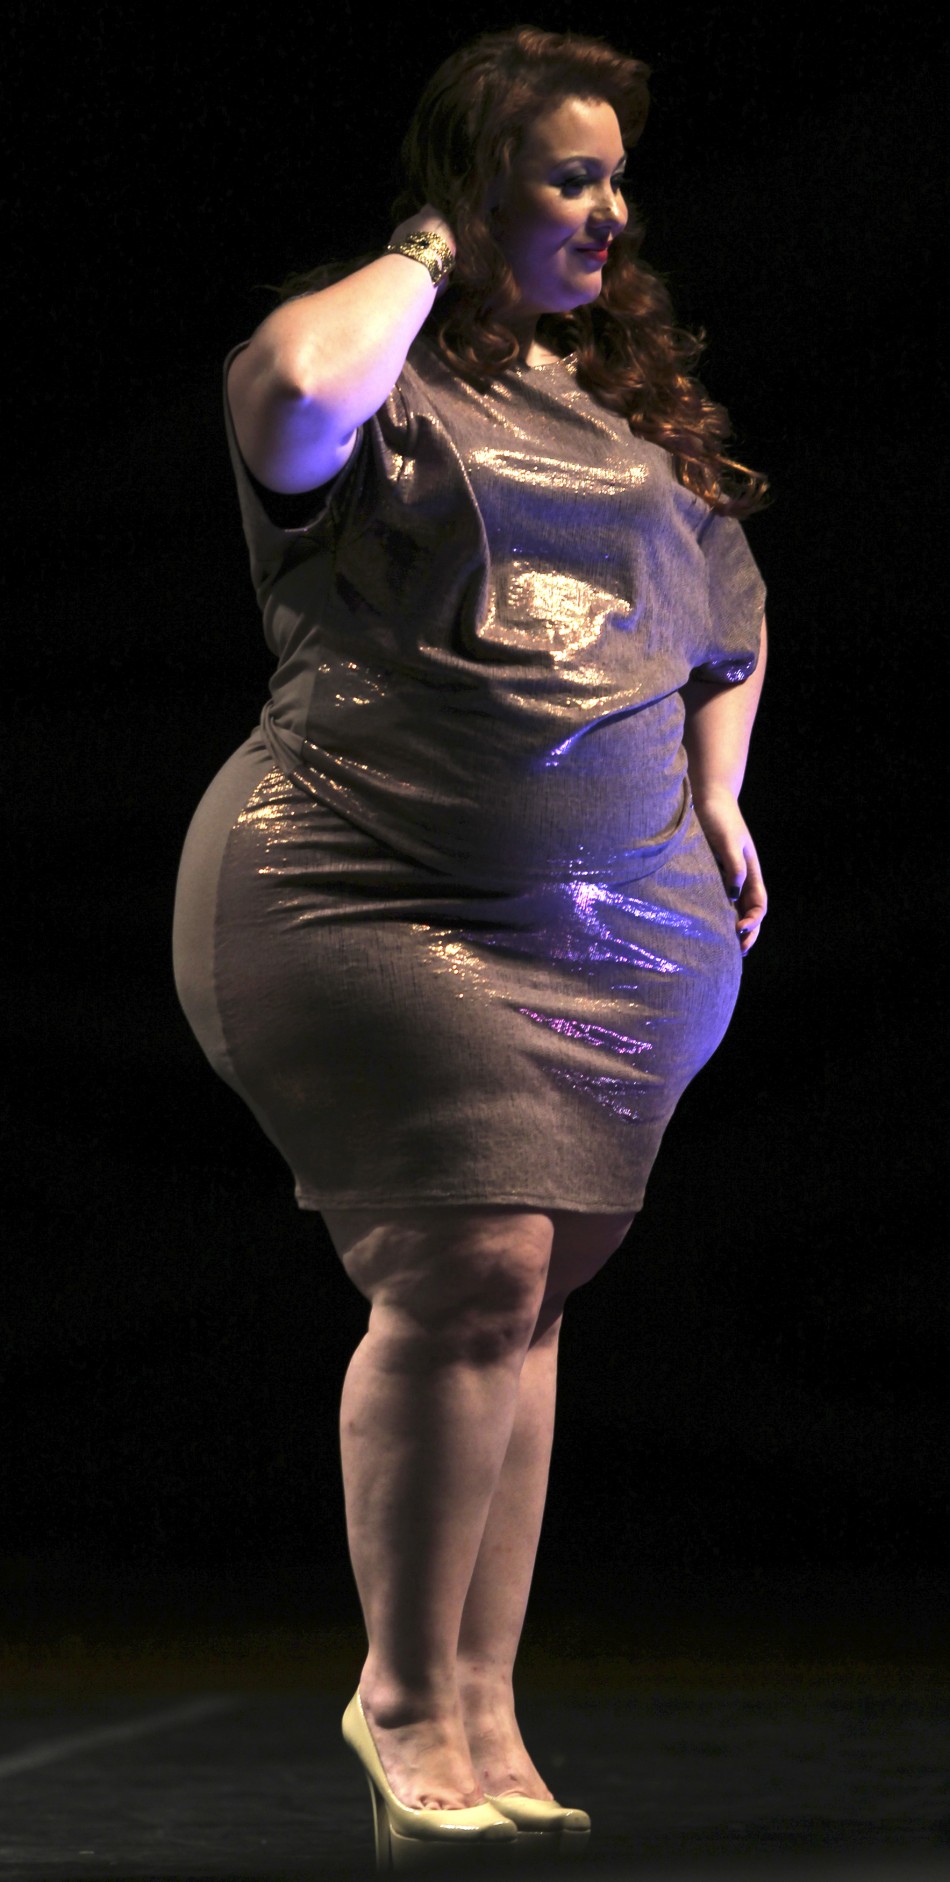 Fashion Weekend Plus Size 2013 Plus Size Models Show Off Curves On The Catwalk In Brazil Photos 4932